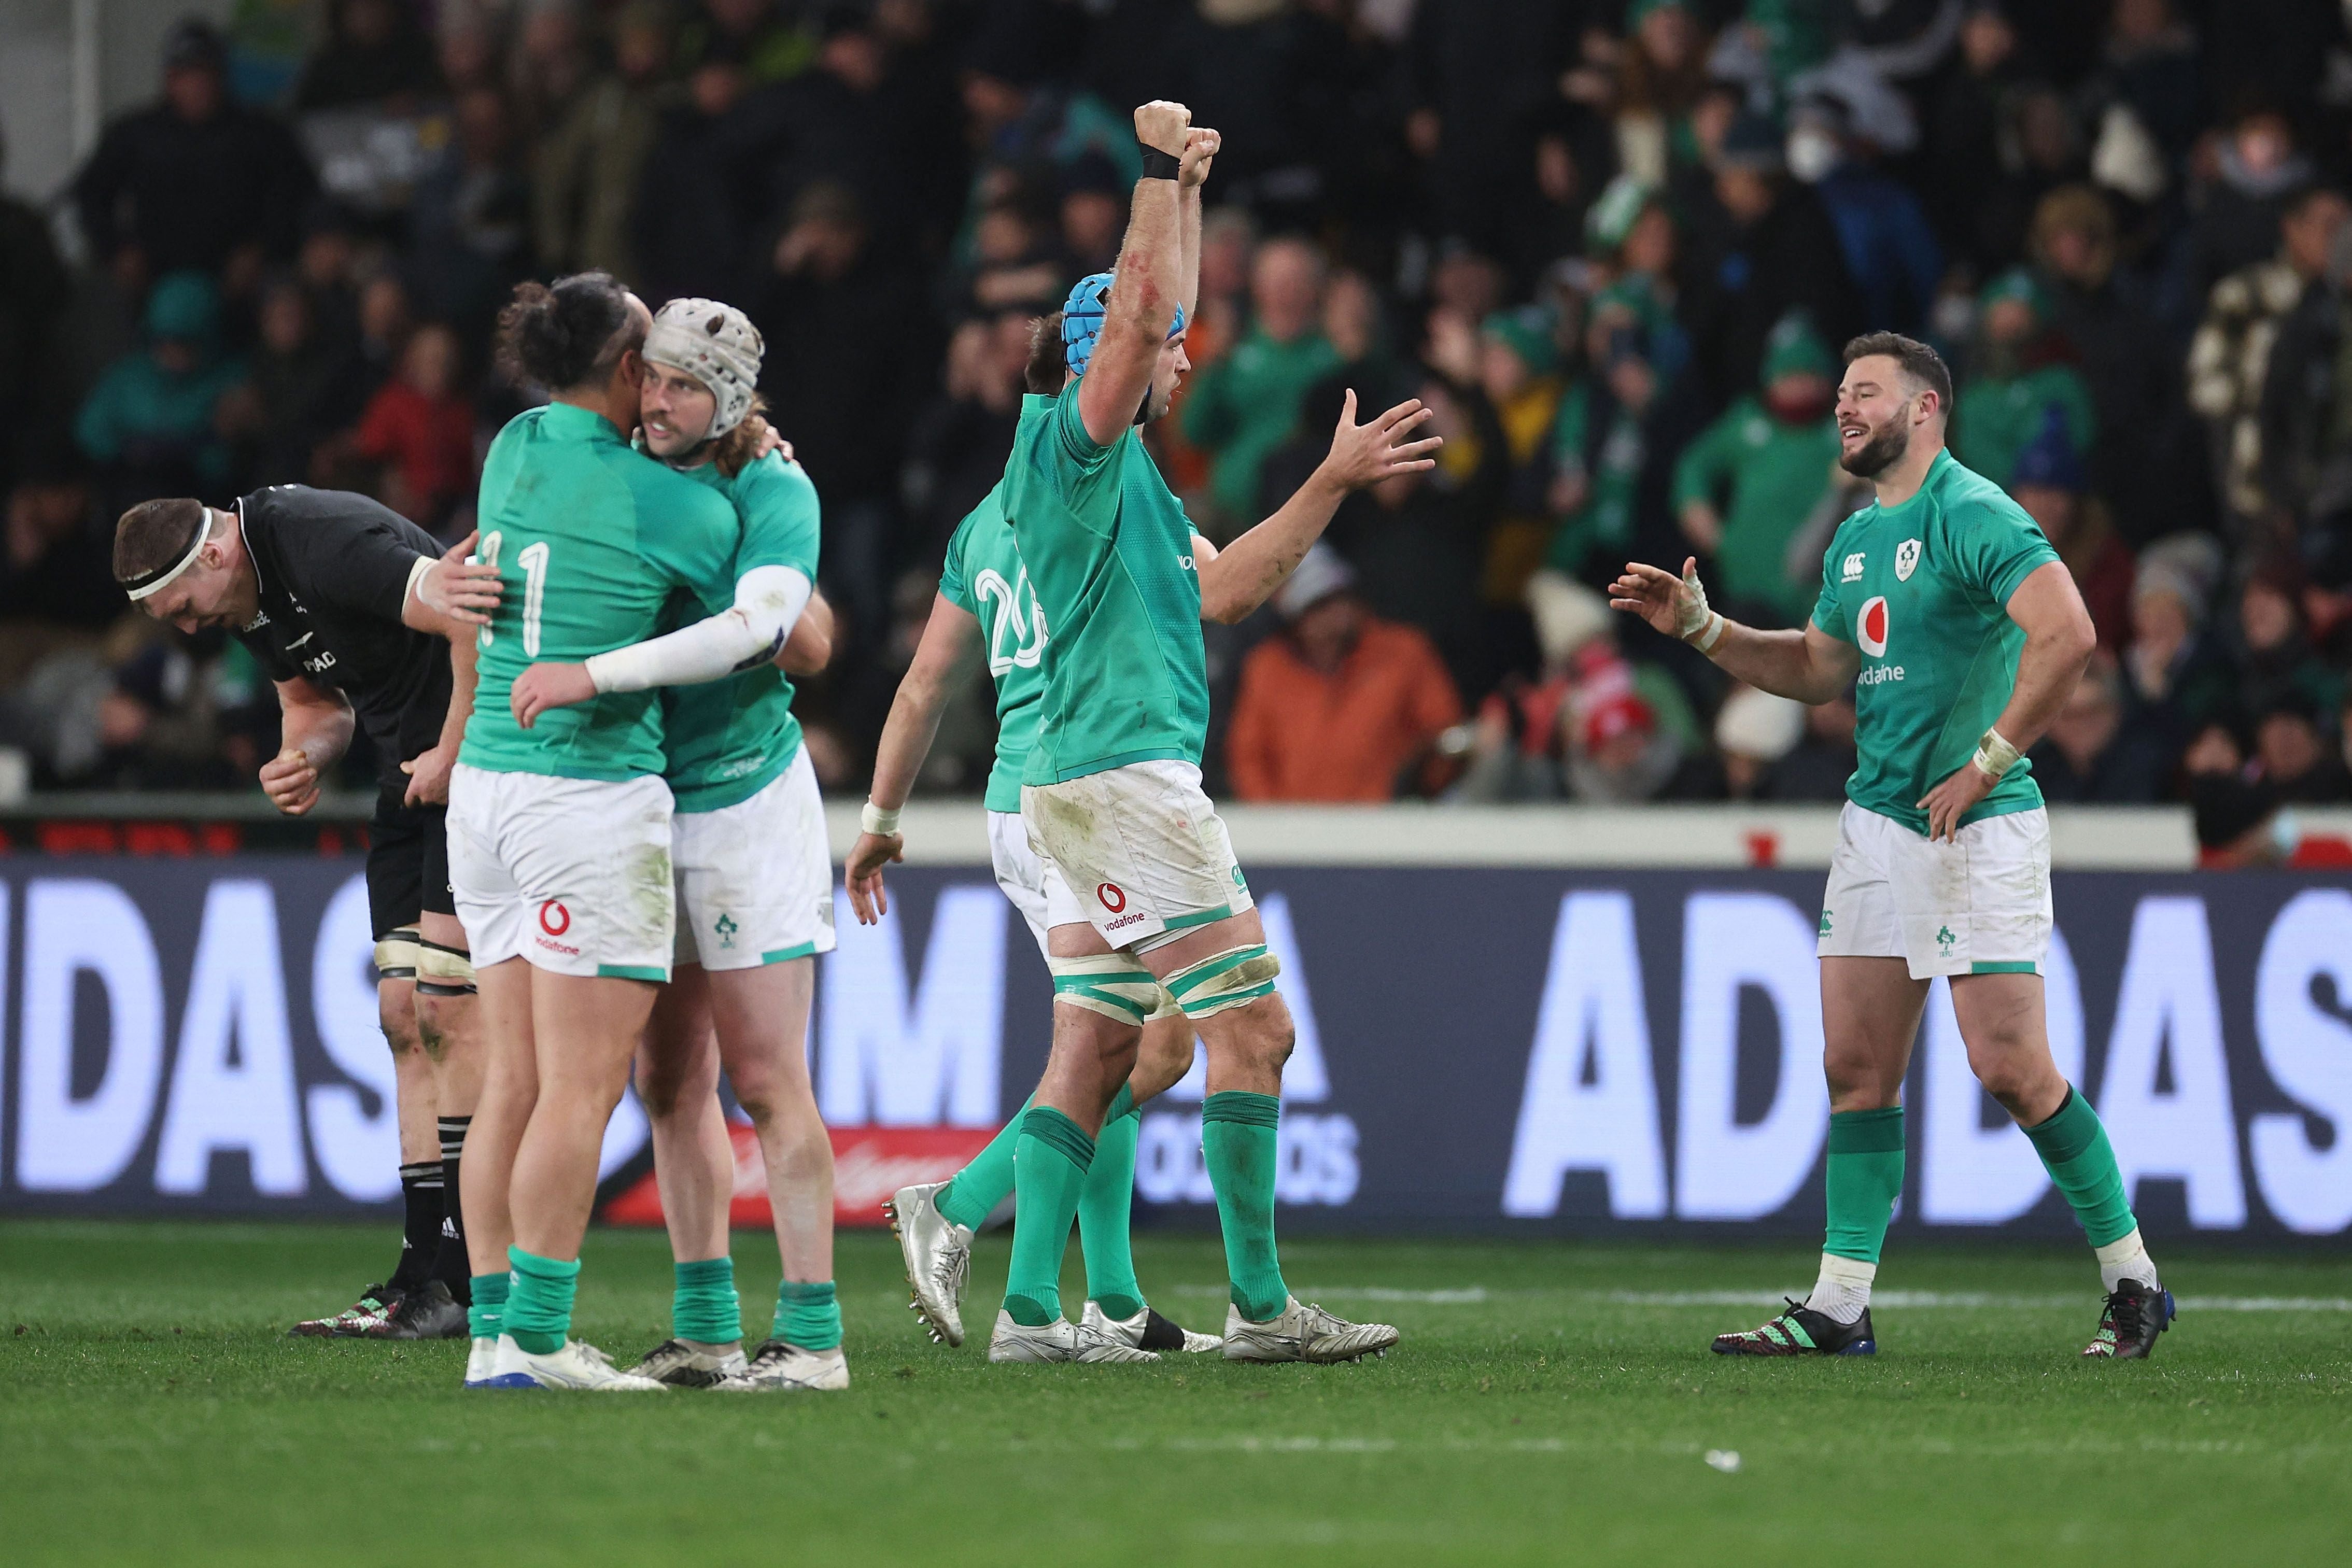 Ireland’s players celebrate their win over New Zealand at Forsyth Barr Stadium in Dunedin on Saturday